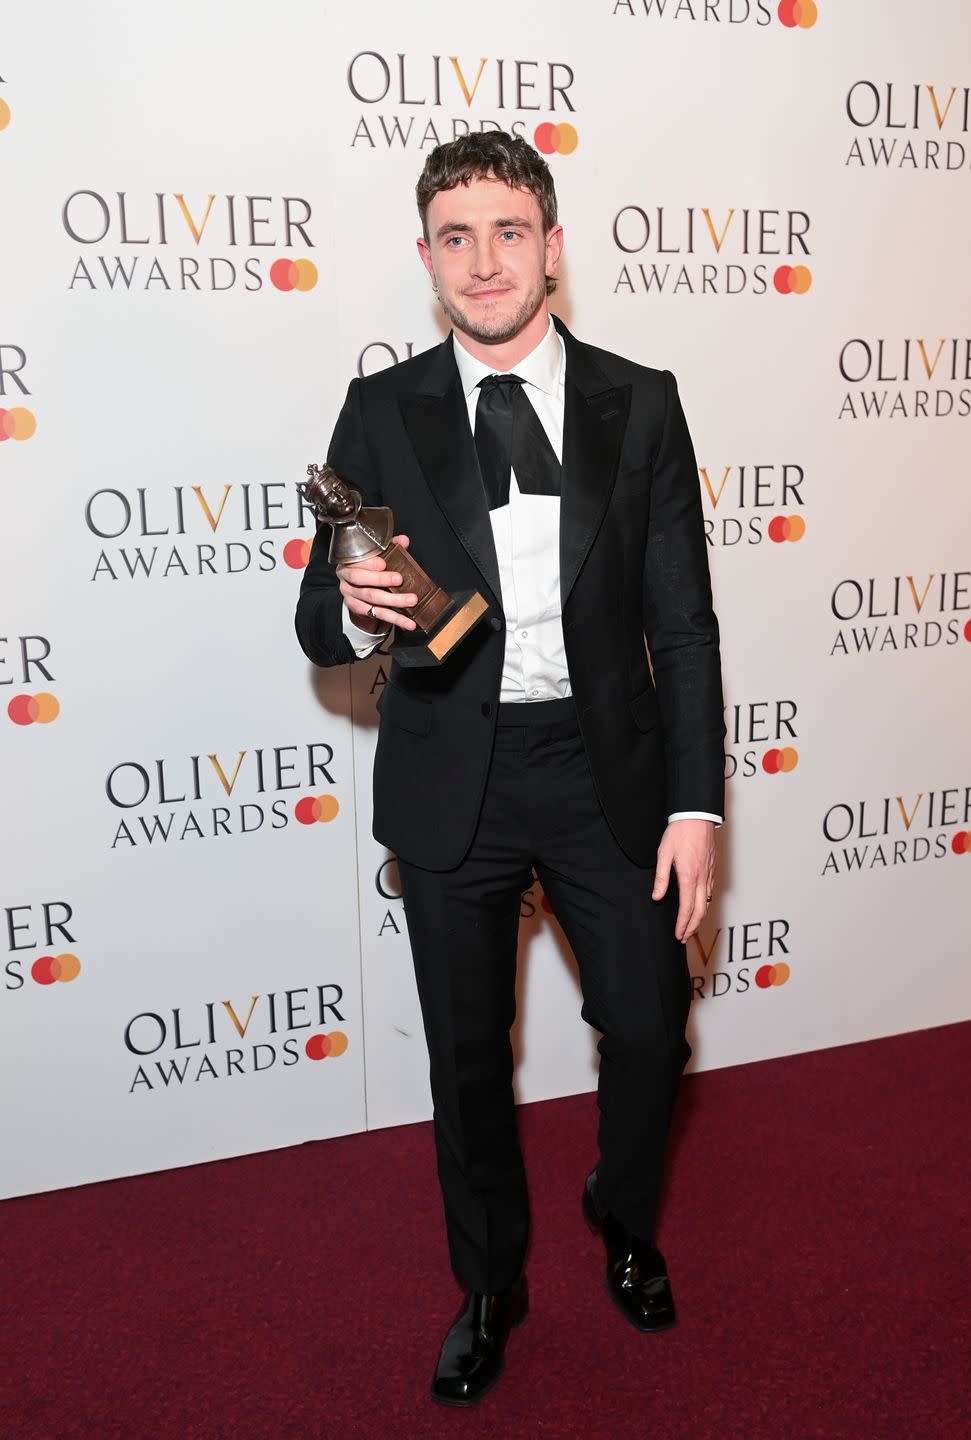 paul mescal, winner of the best actor award for a streetcar named desire, olivier awards 2023